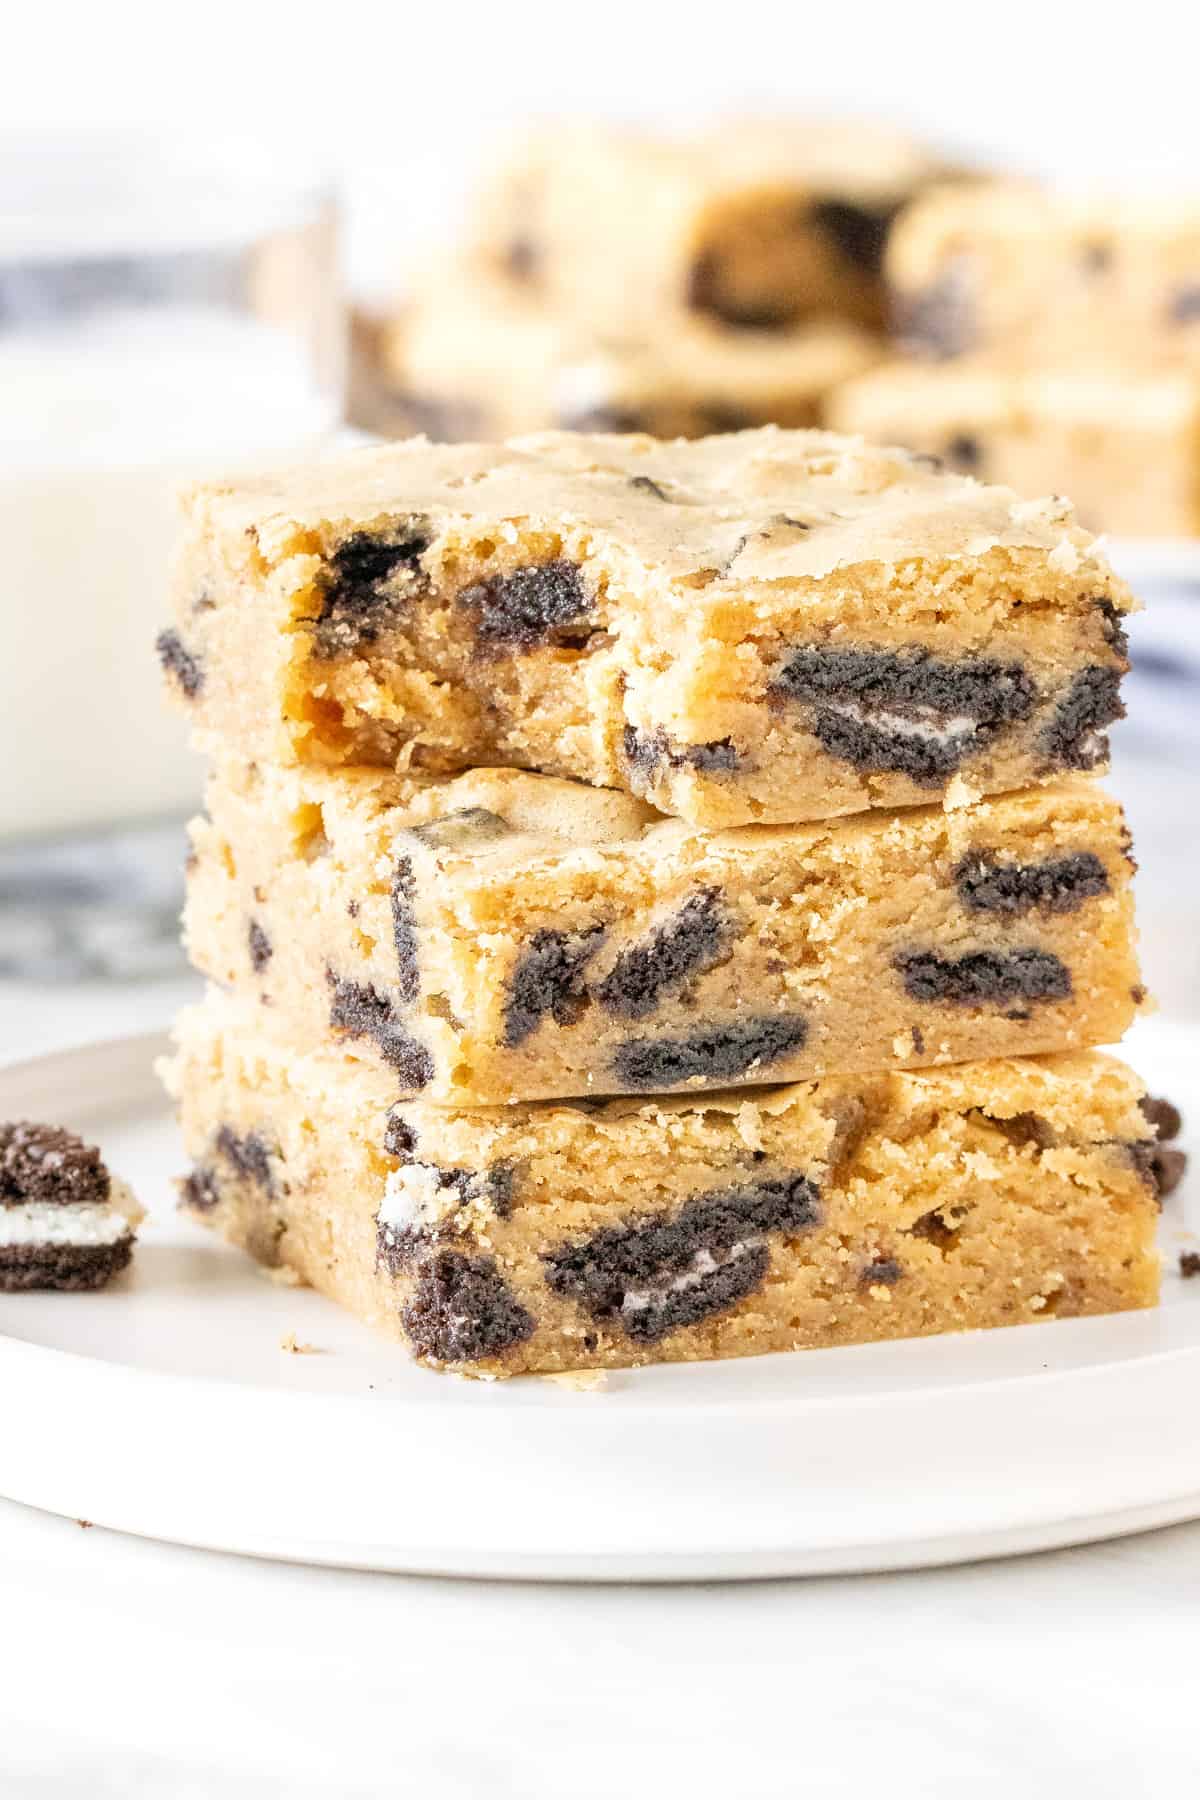 Stack of Oreo blondies on a plate with a glass of milk